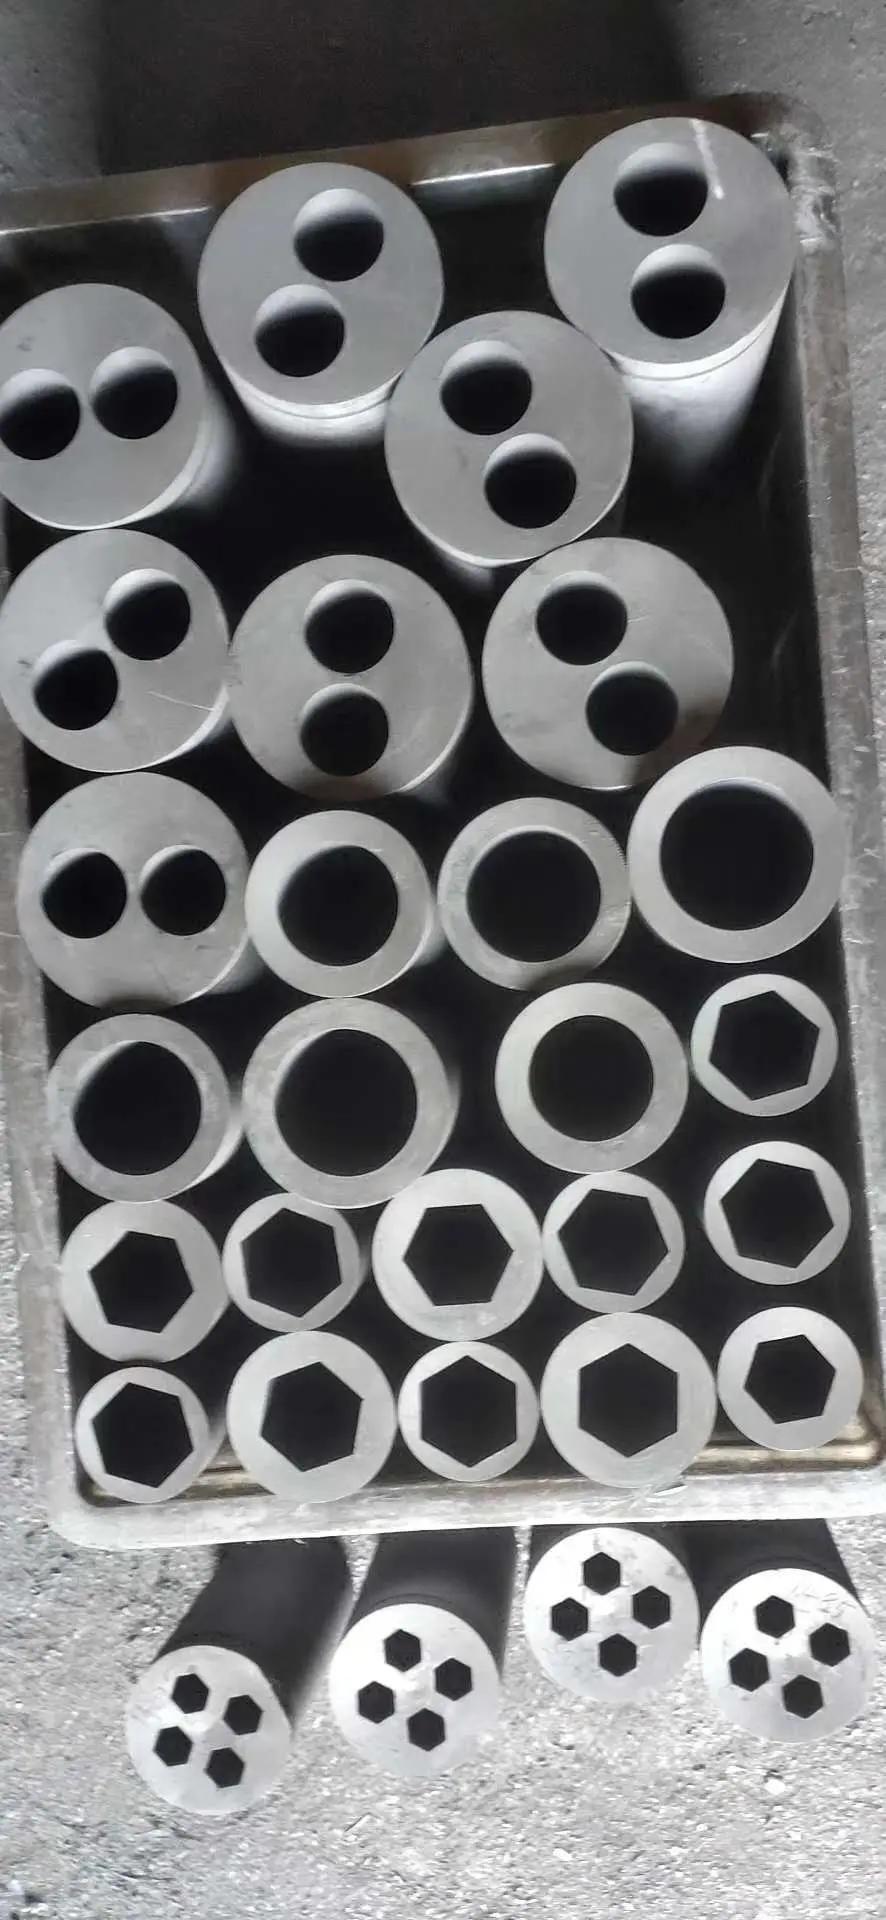 Chinese Supplier of Graphite Casting Melting Mold for Brass Bars, Rods, Tubes